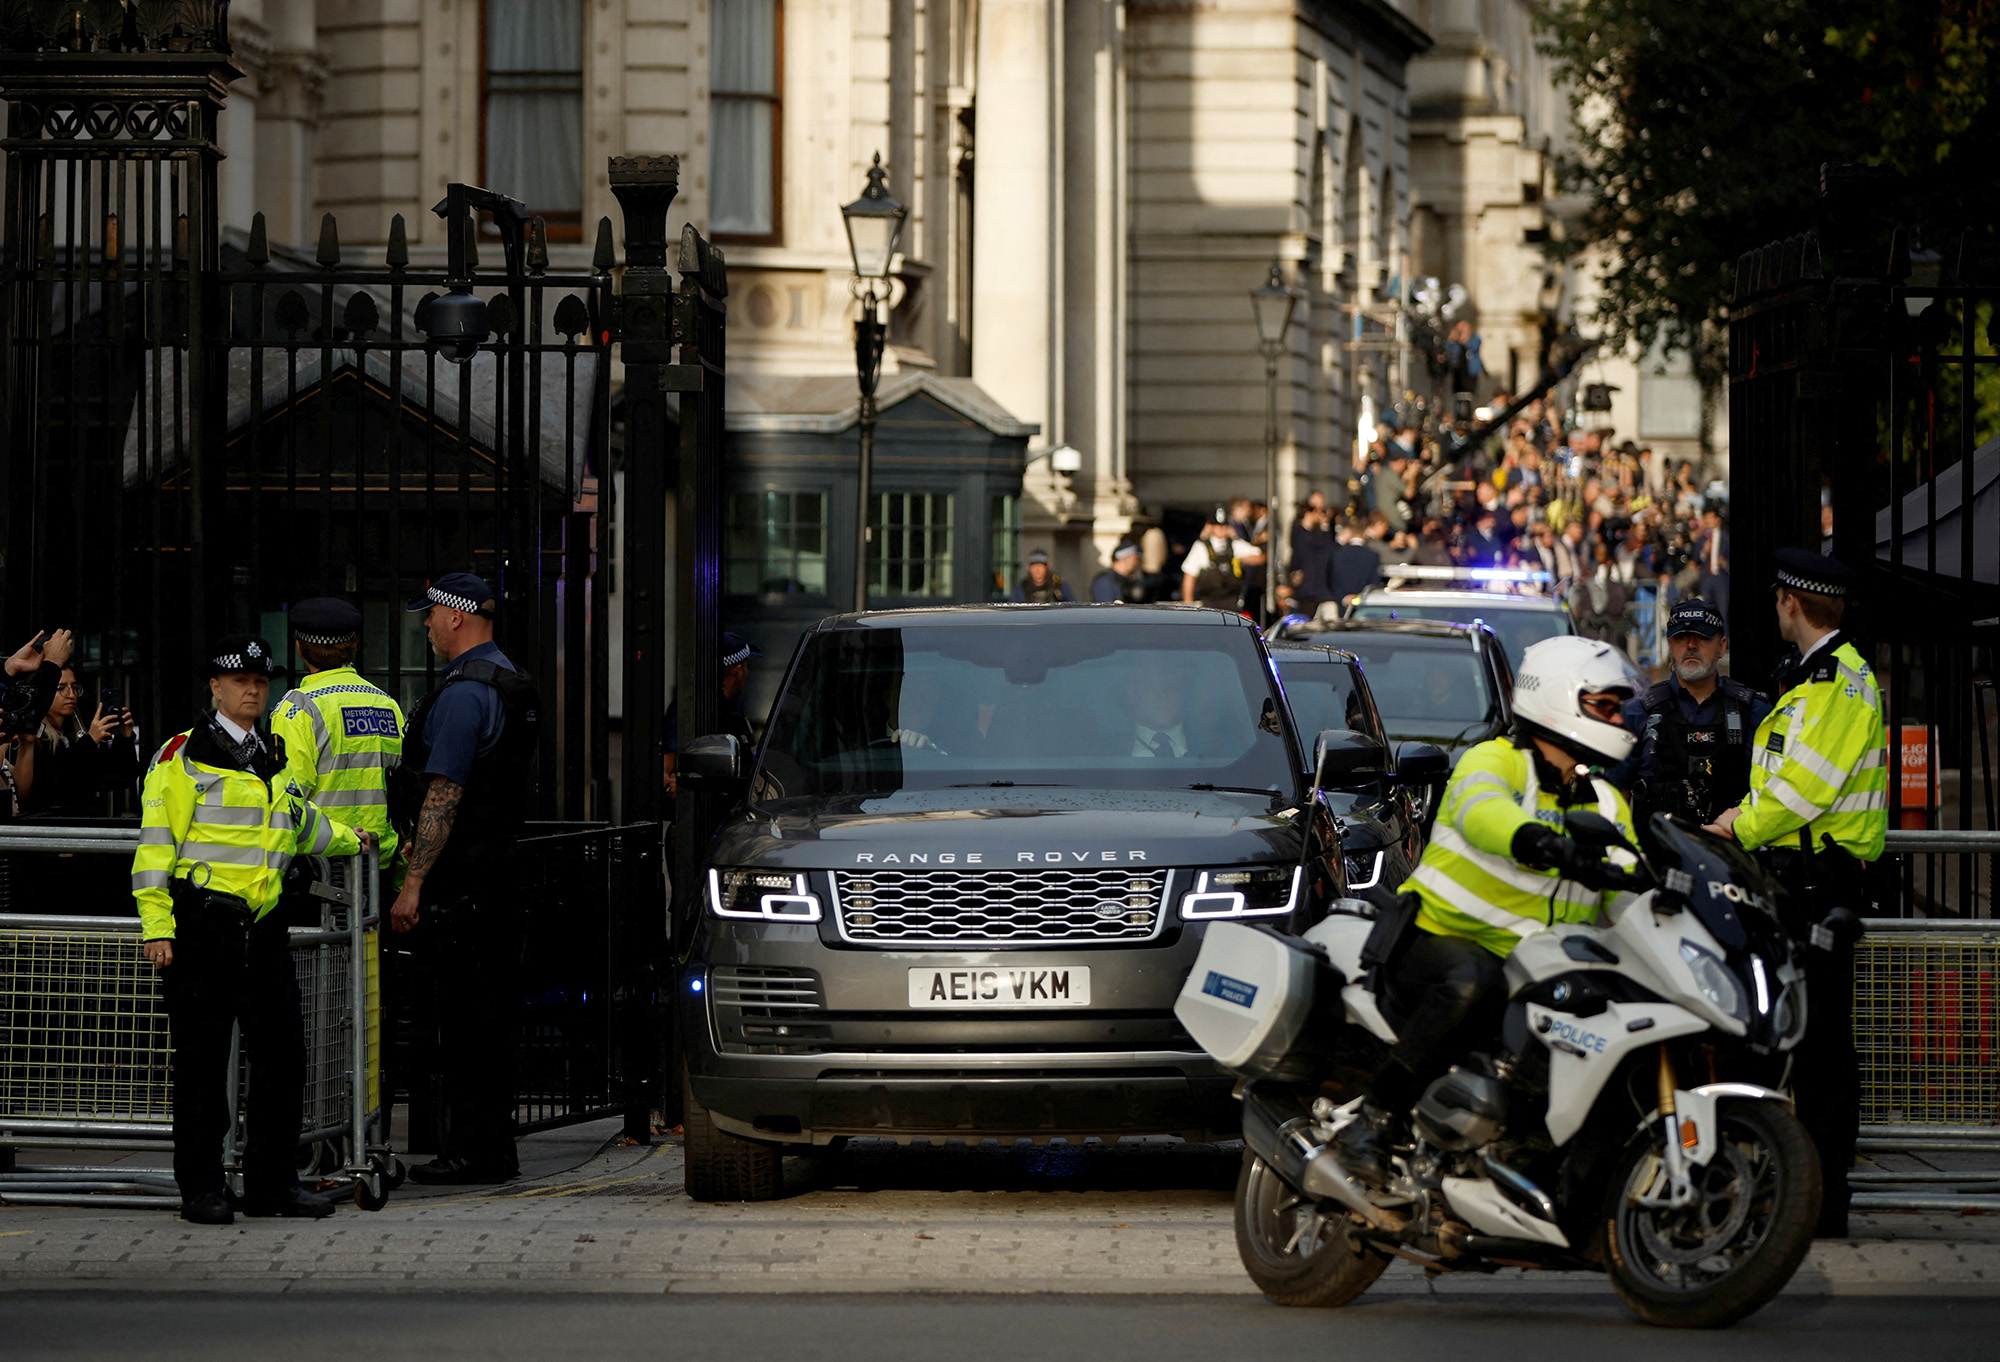 The motorcade transporting the outgoing British Prime Minister Boris Johnson leaves Downing Street, in London, England, on September 6.